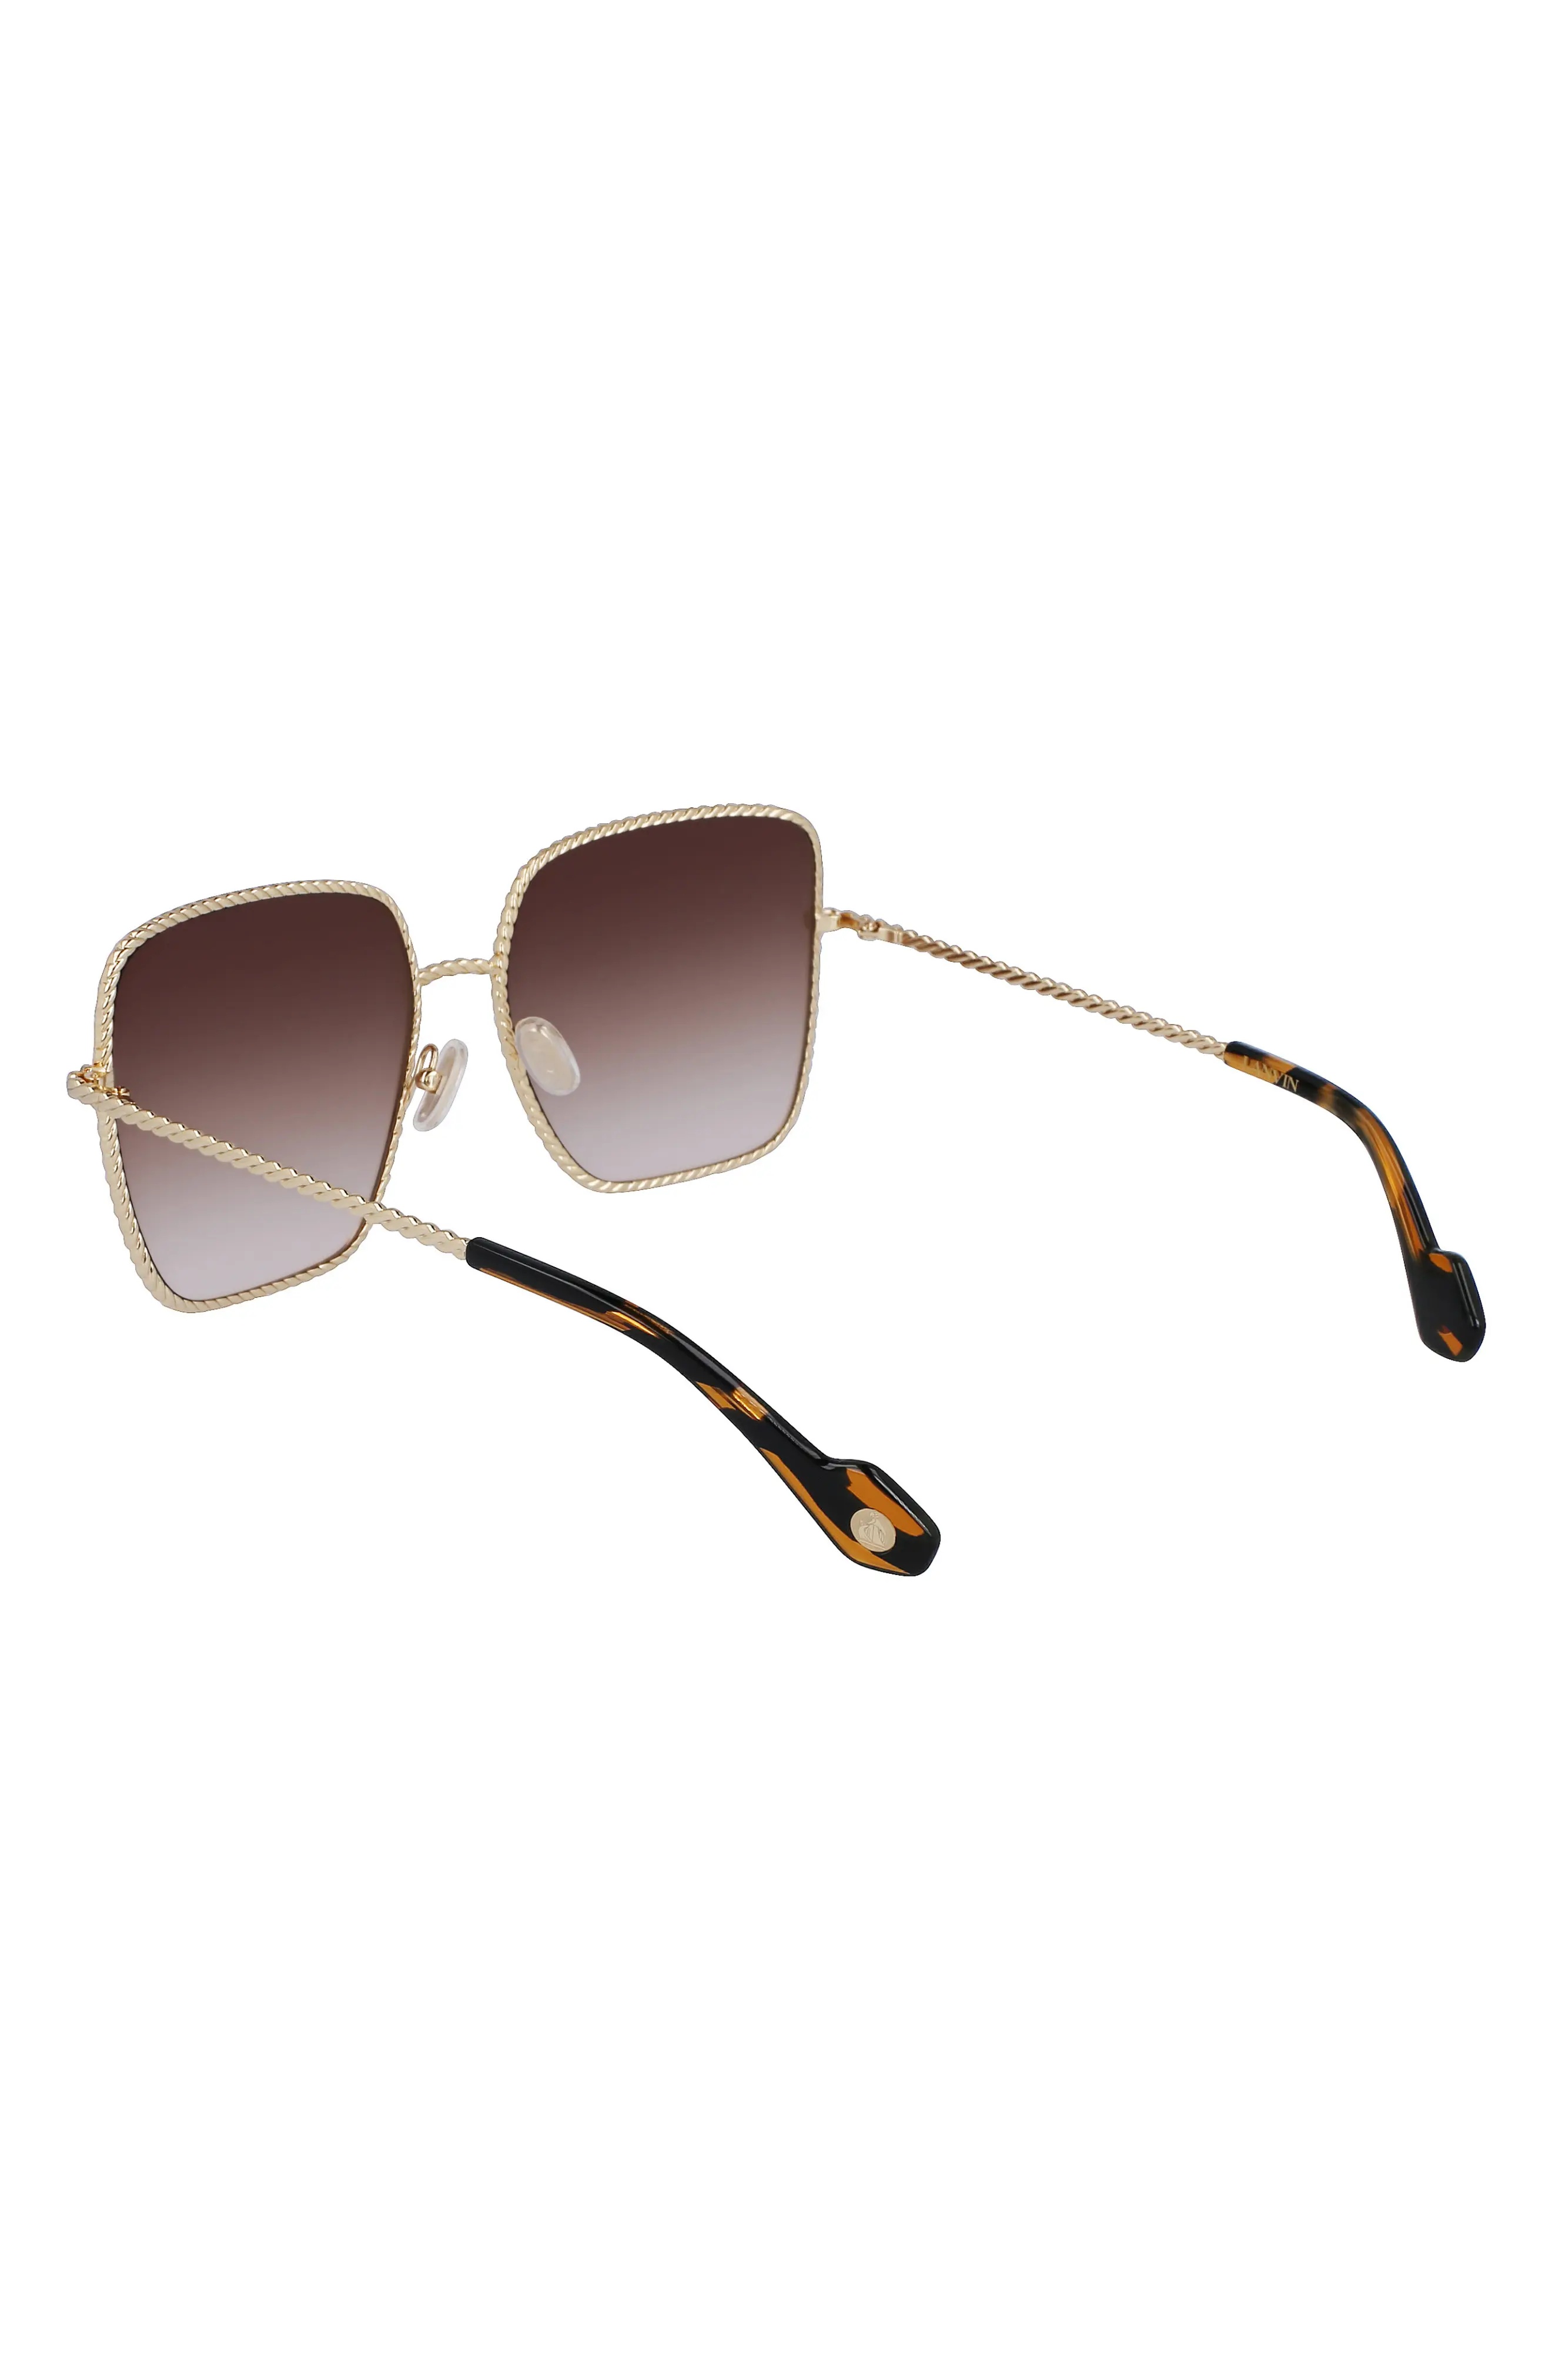 Babe 59mm Gradient Square Sunglasses in Gold/Gradient Brown - 5